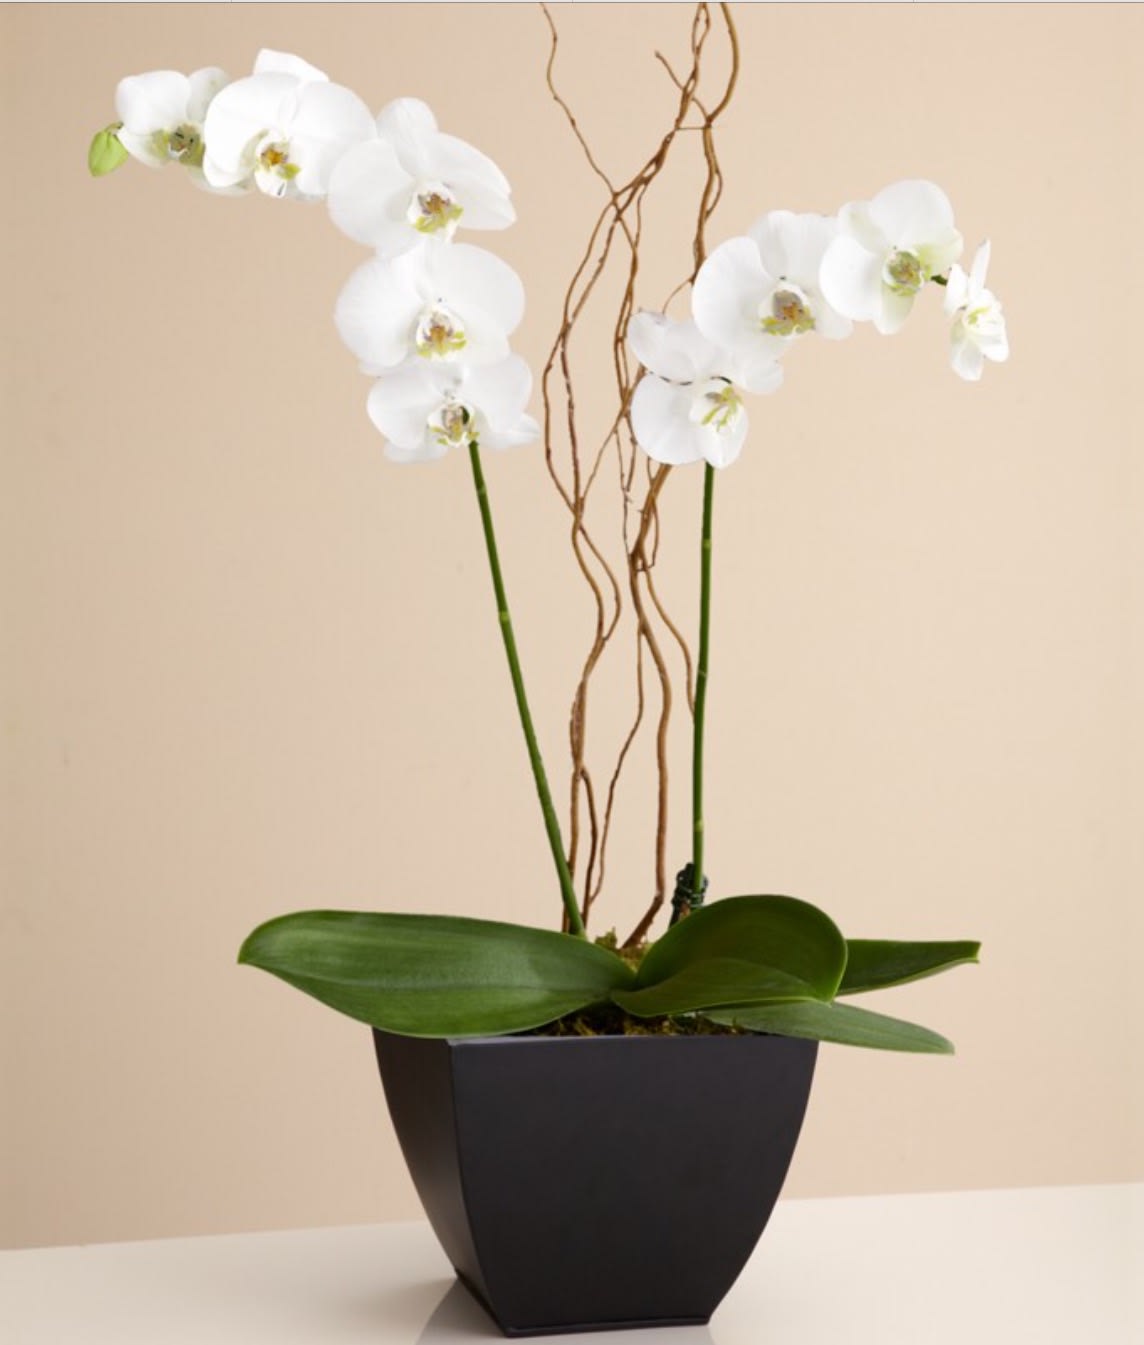 Graceful White Orchid Plant - Send Zen. A graceful white phaleanopsis orchid plant potted in a modern container is an enchanting gift for any occasion. These plants will reward you with several months of beautiful blooms.